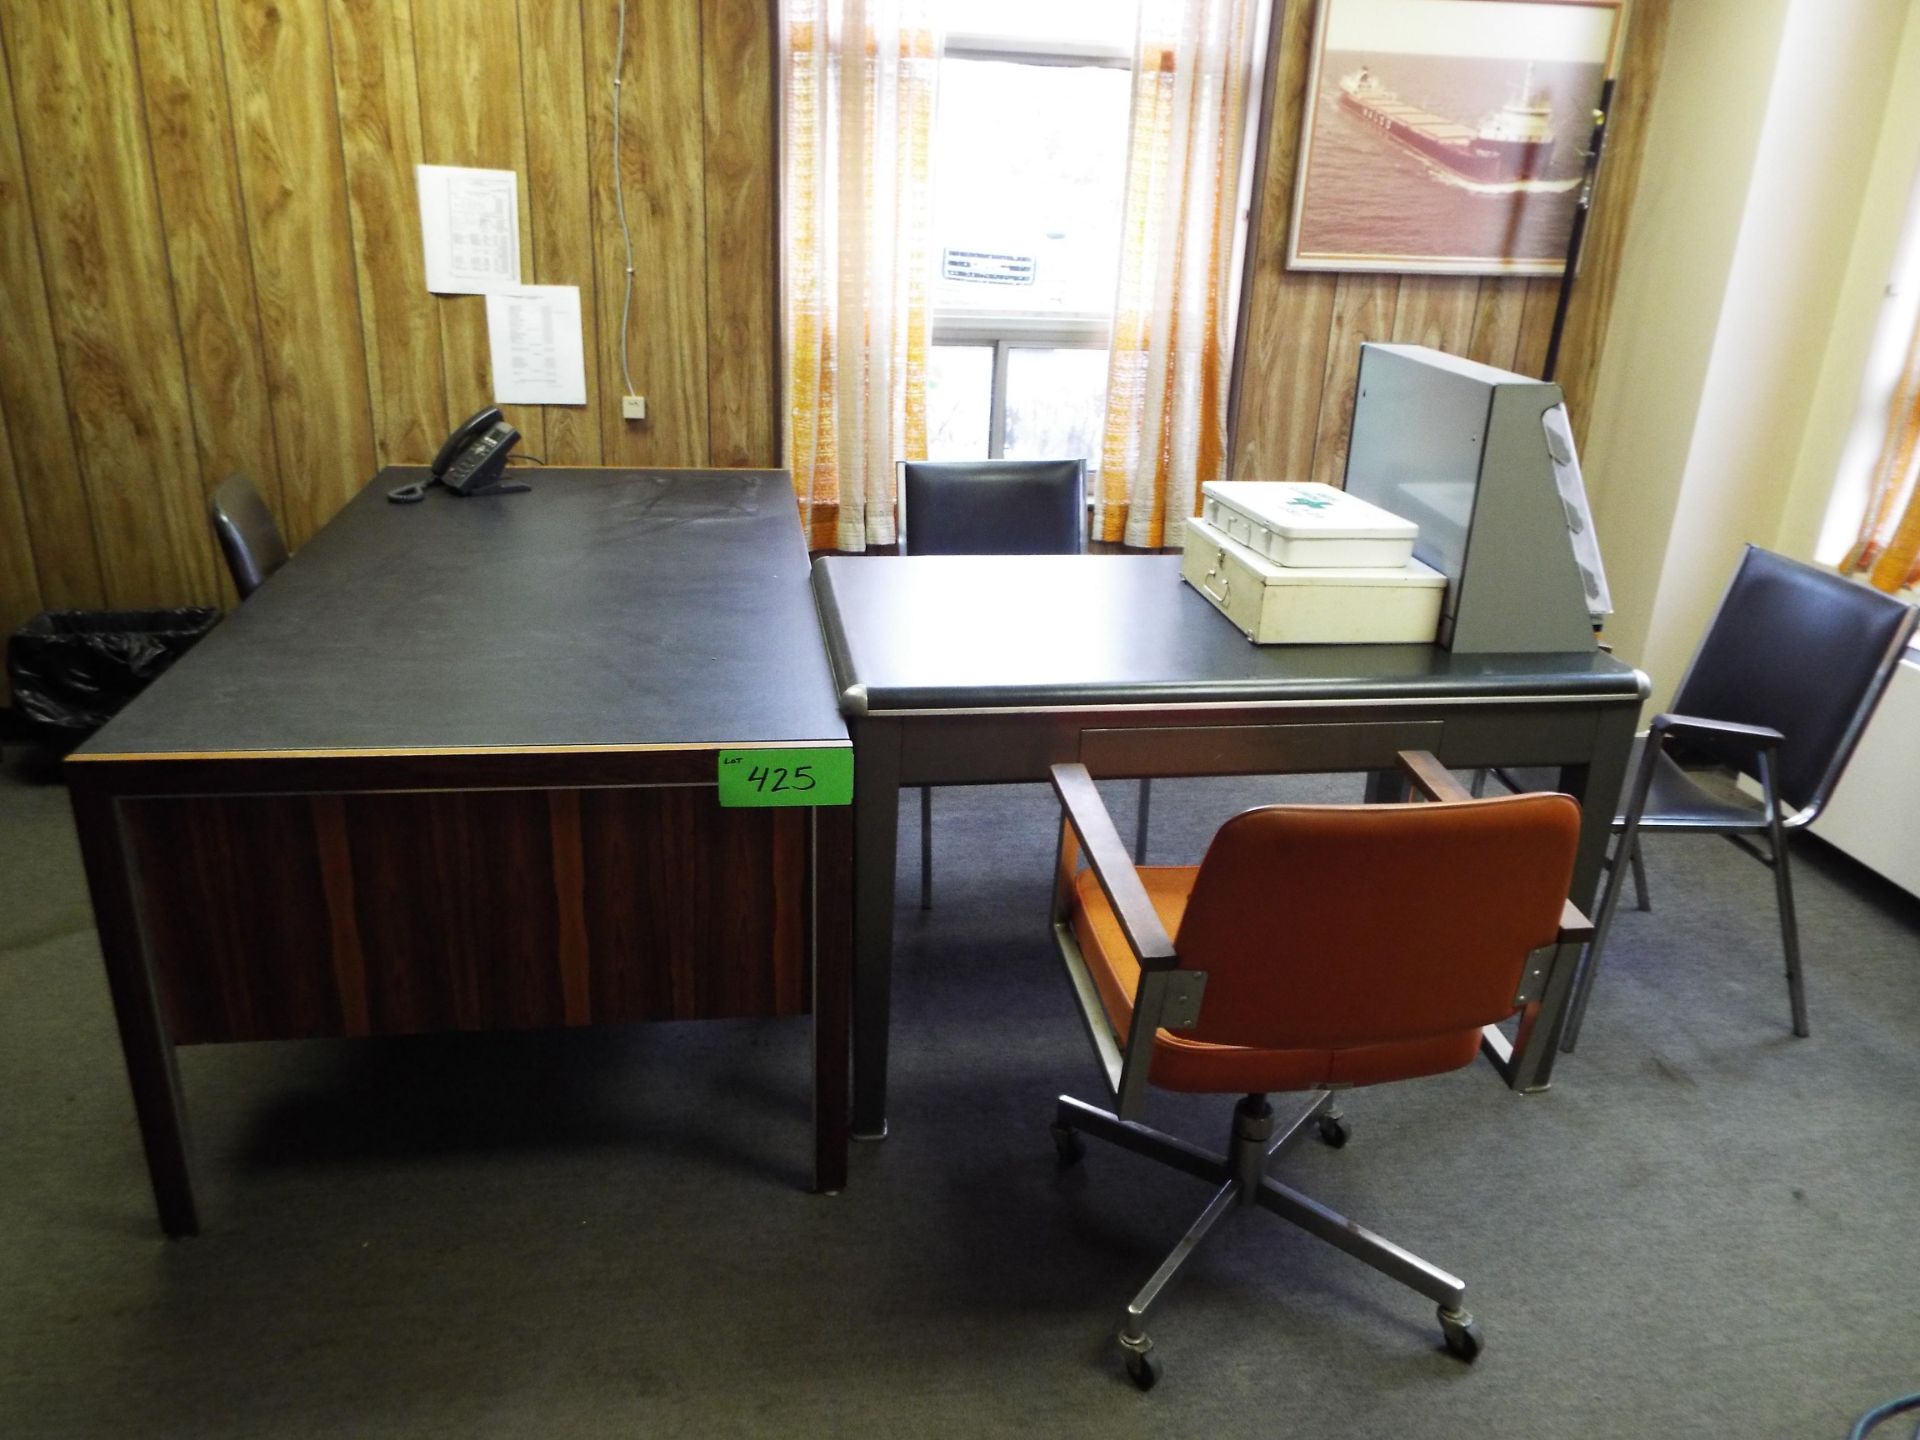 LOT/ REMAINING CONTENTS OF OFFICE (FURNITURE ONLY)